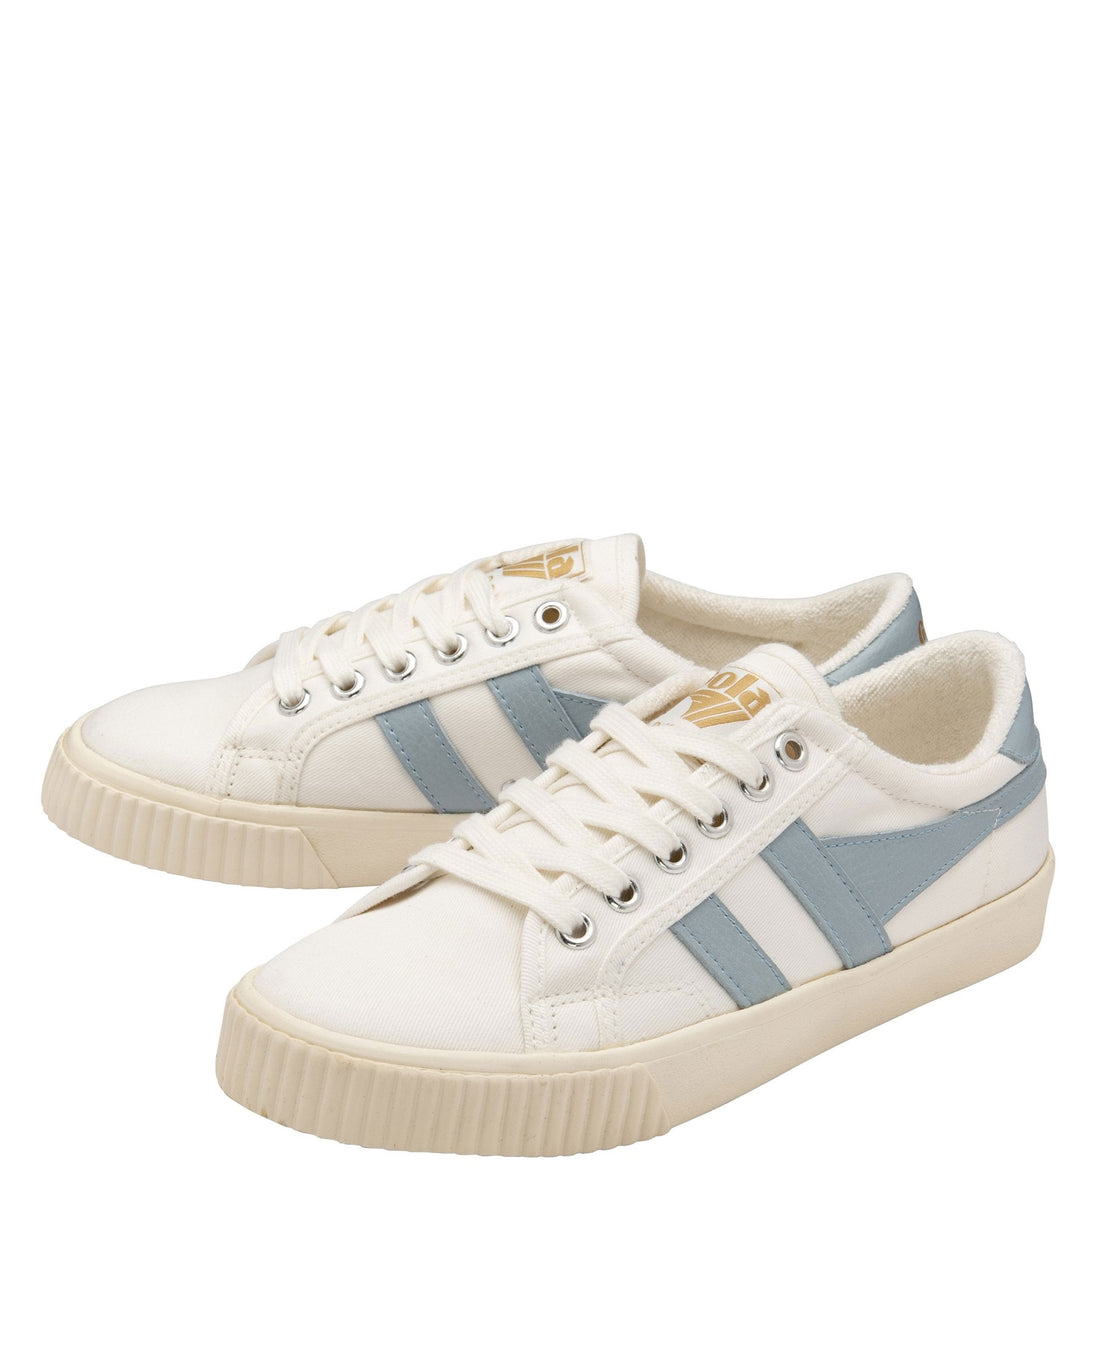 Tennis Mark Cox Trainers - Off White/Ice Blue